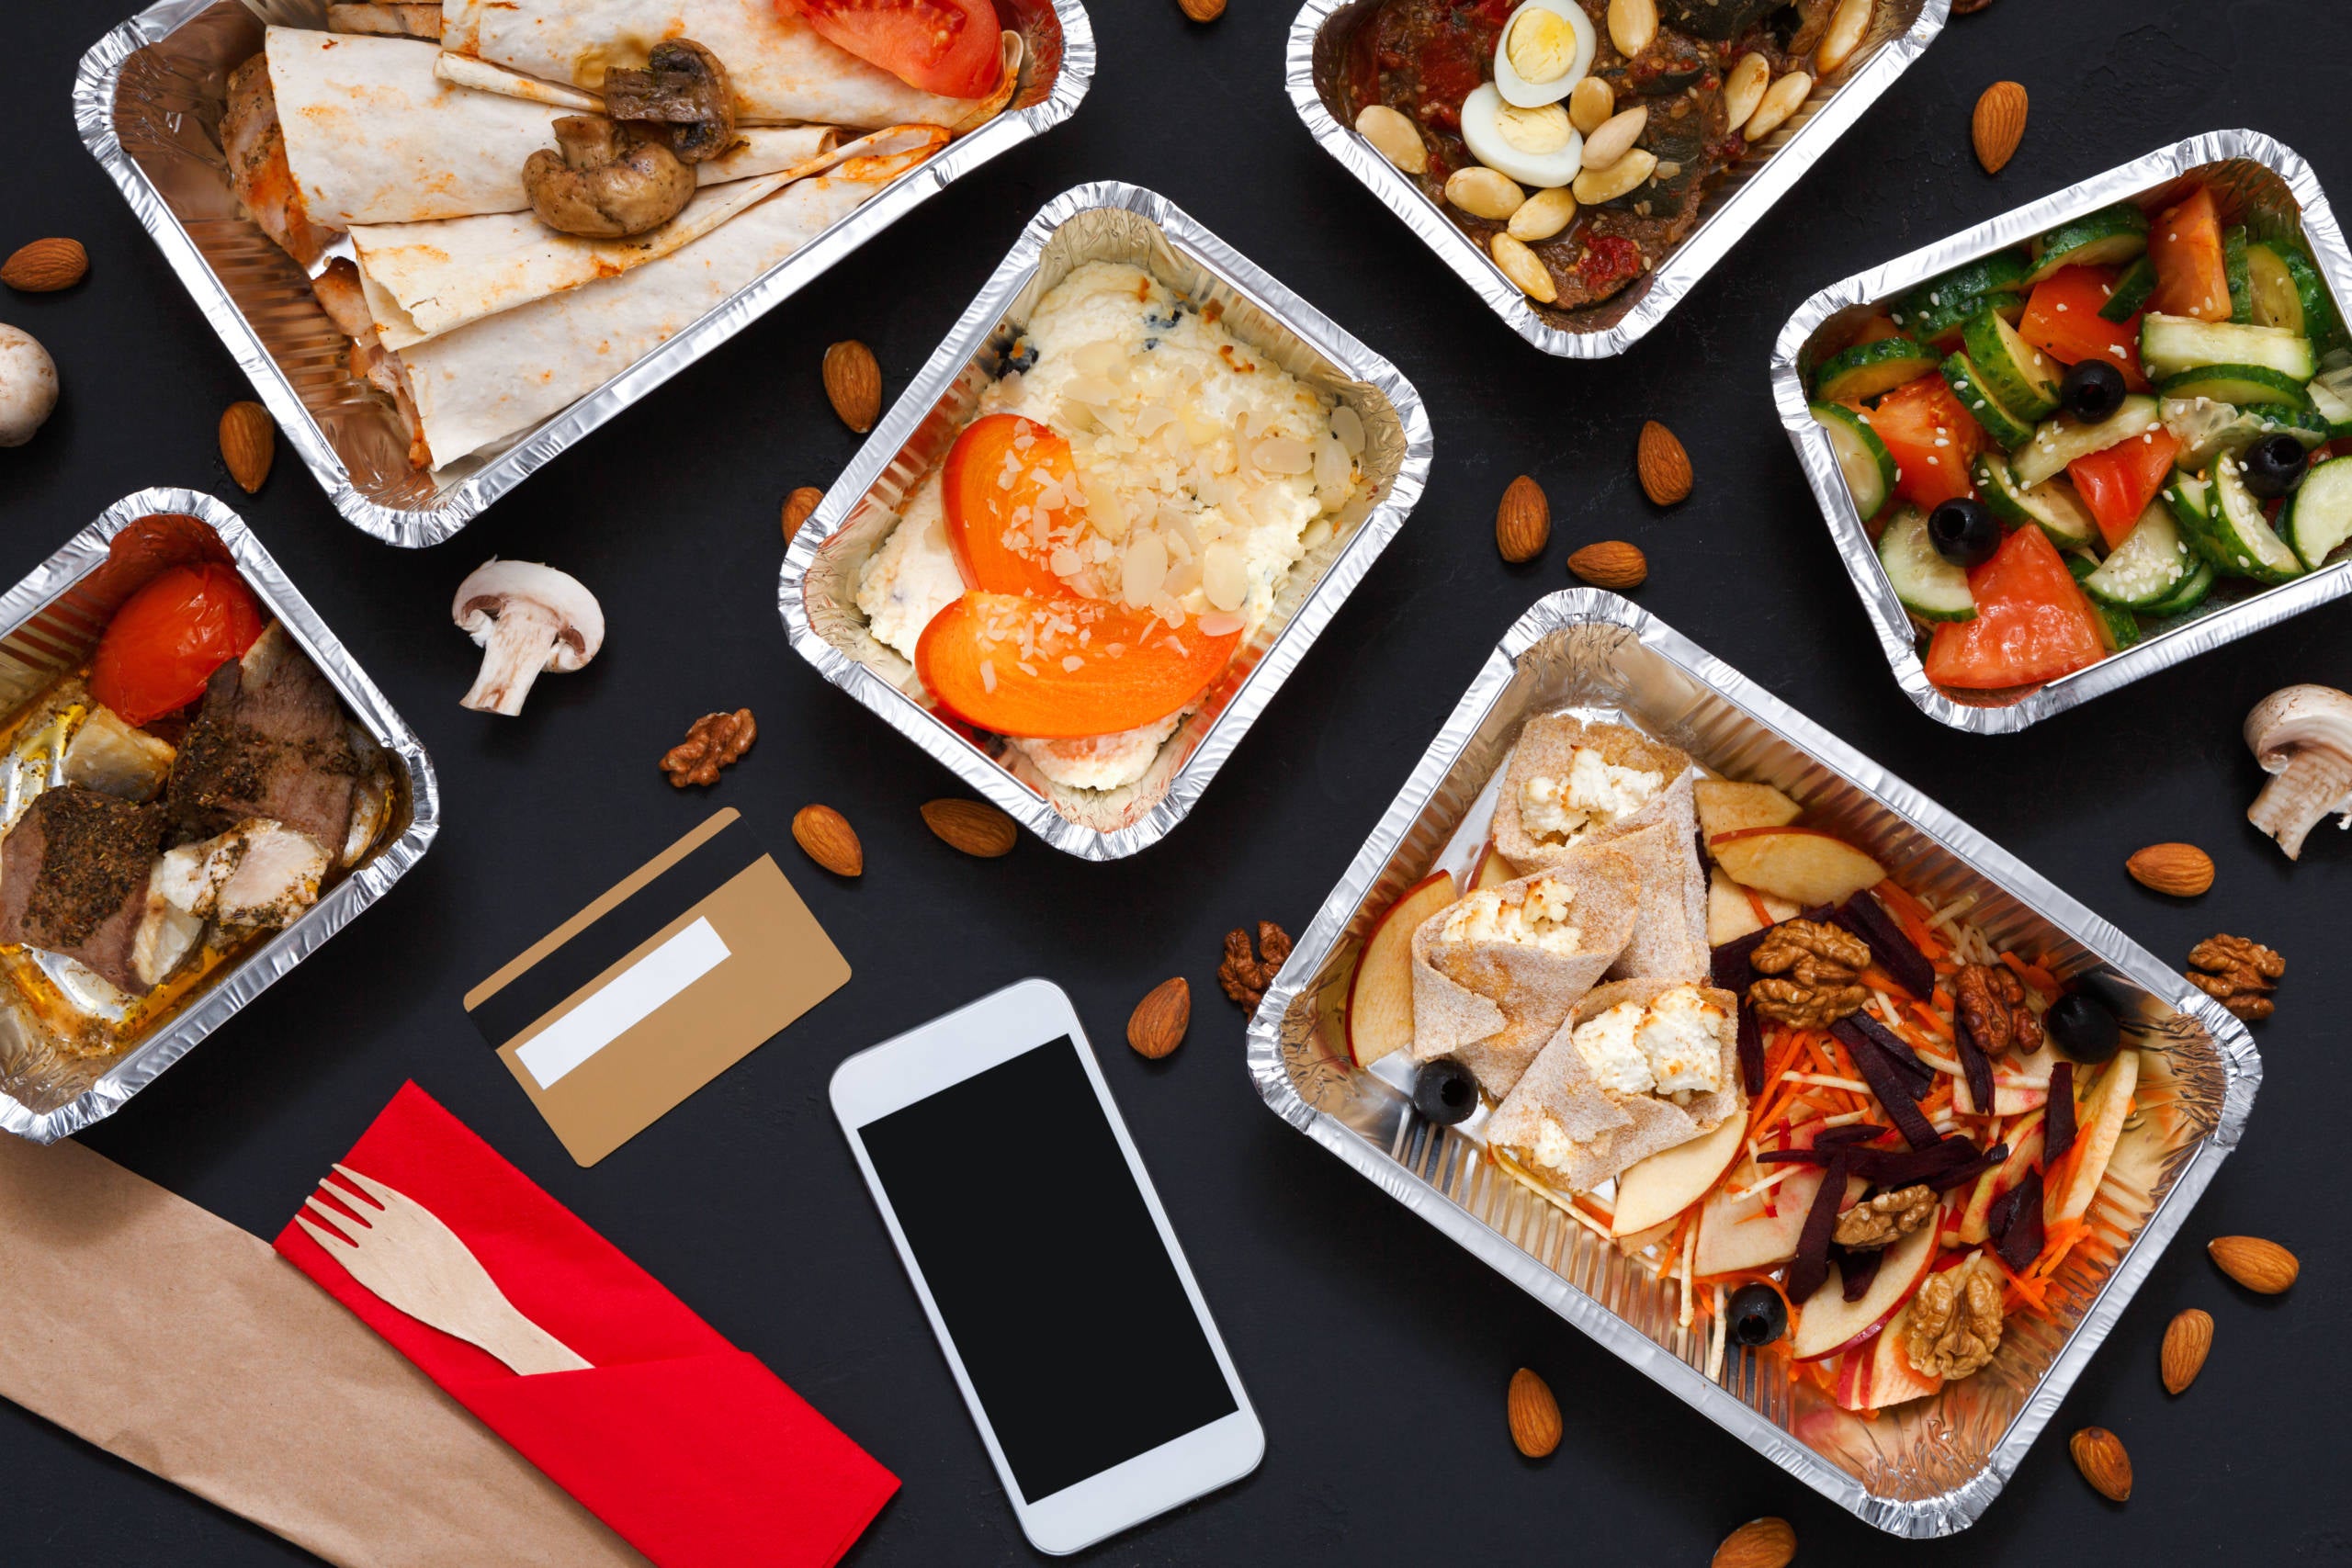 DoorDash, Grubhub and Uber Eats promo codes and offers